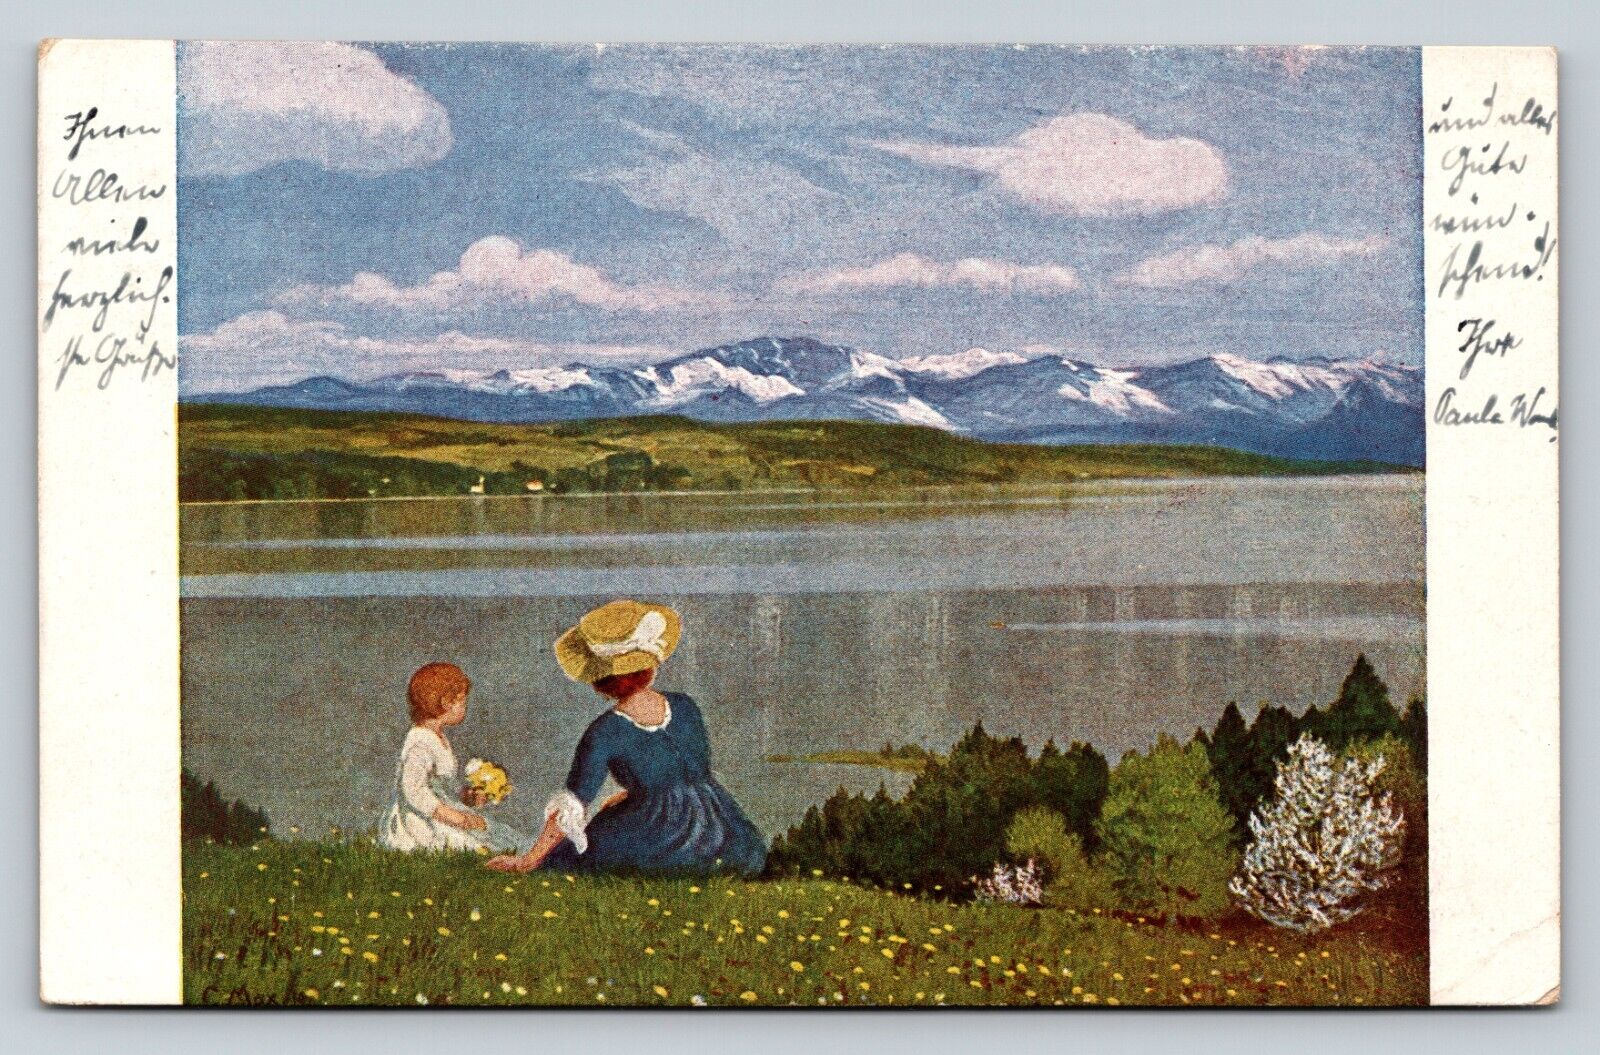 c1924 Lady in Blue Sits w/ Girl in White Looking at Mountains VTG Postcard 1188